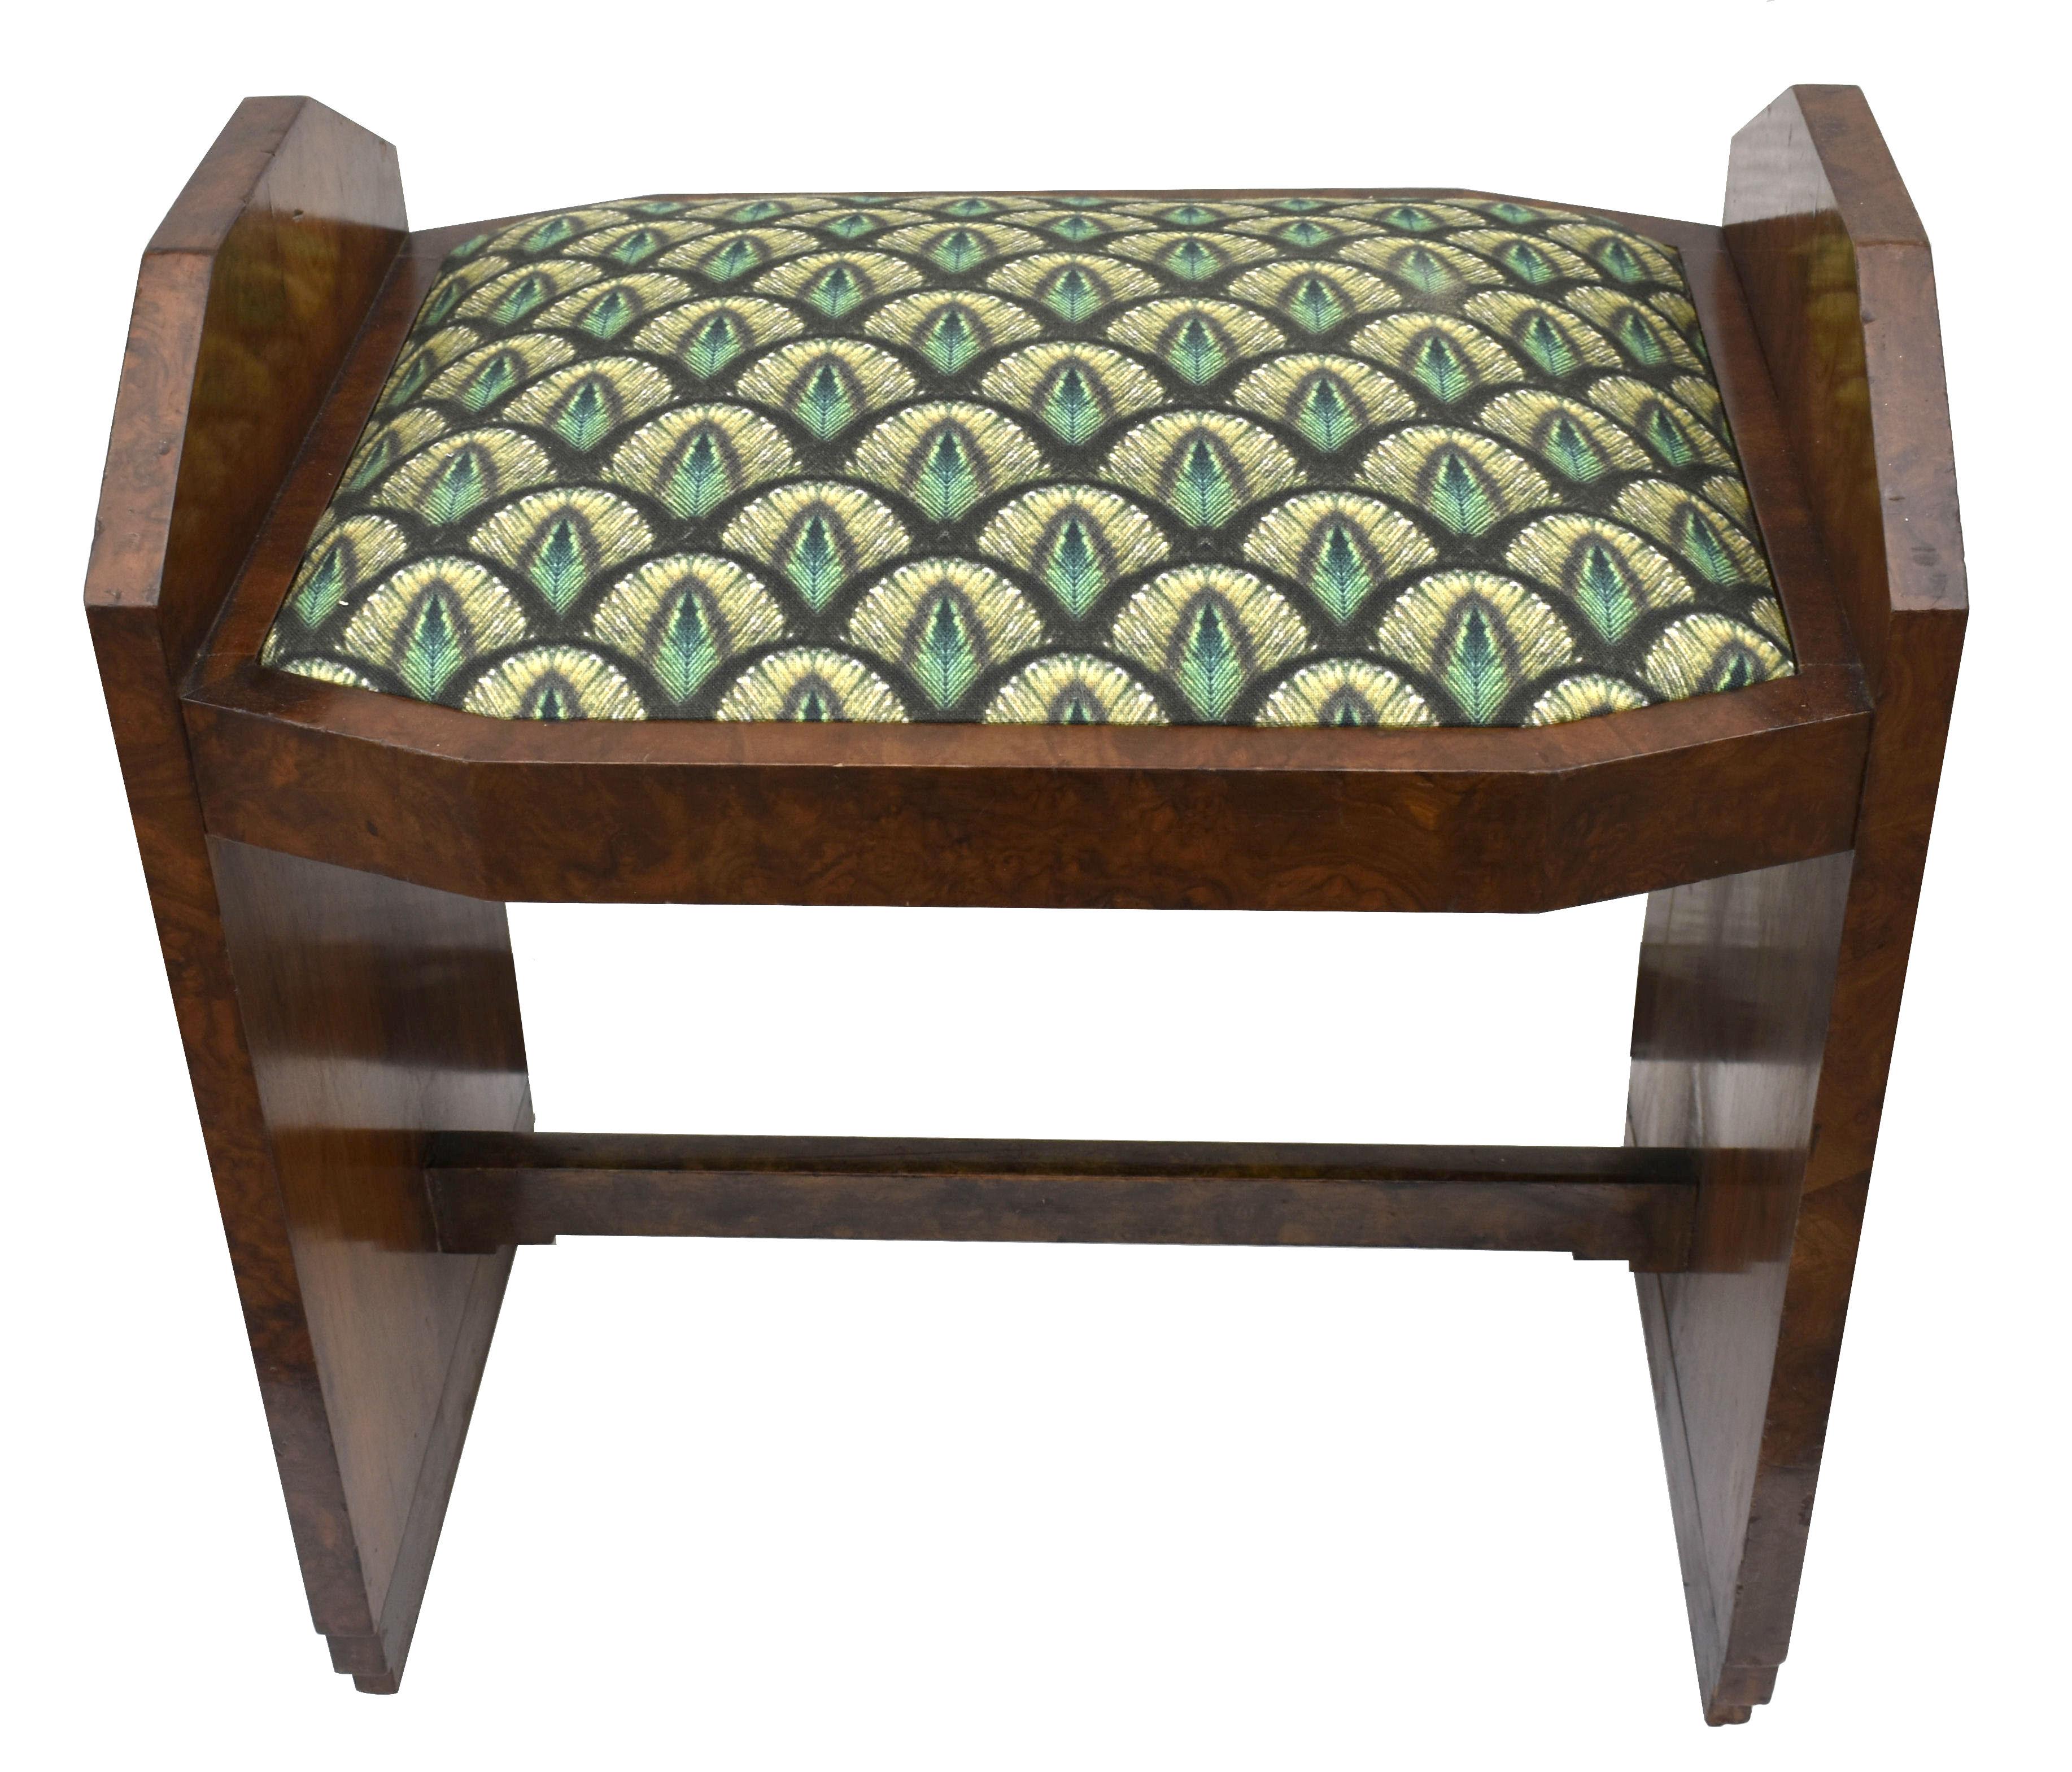 Very stylish Art Deco dressing stool dating to the 1930s, can be used for dressing table or footstool. Newly reupholstered in an Art Deco style fabric, beautifully figured walnut veneers. Wonderful and iconic stepped shape to the sides. Offered to